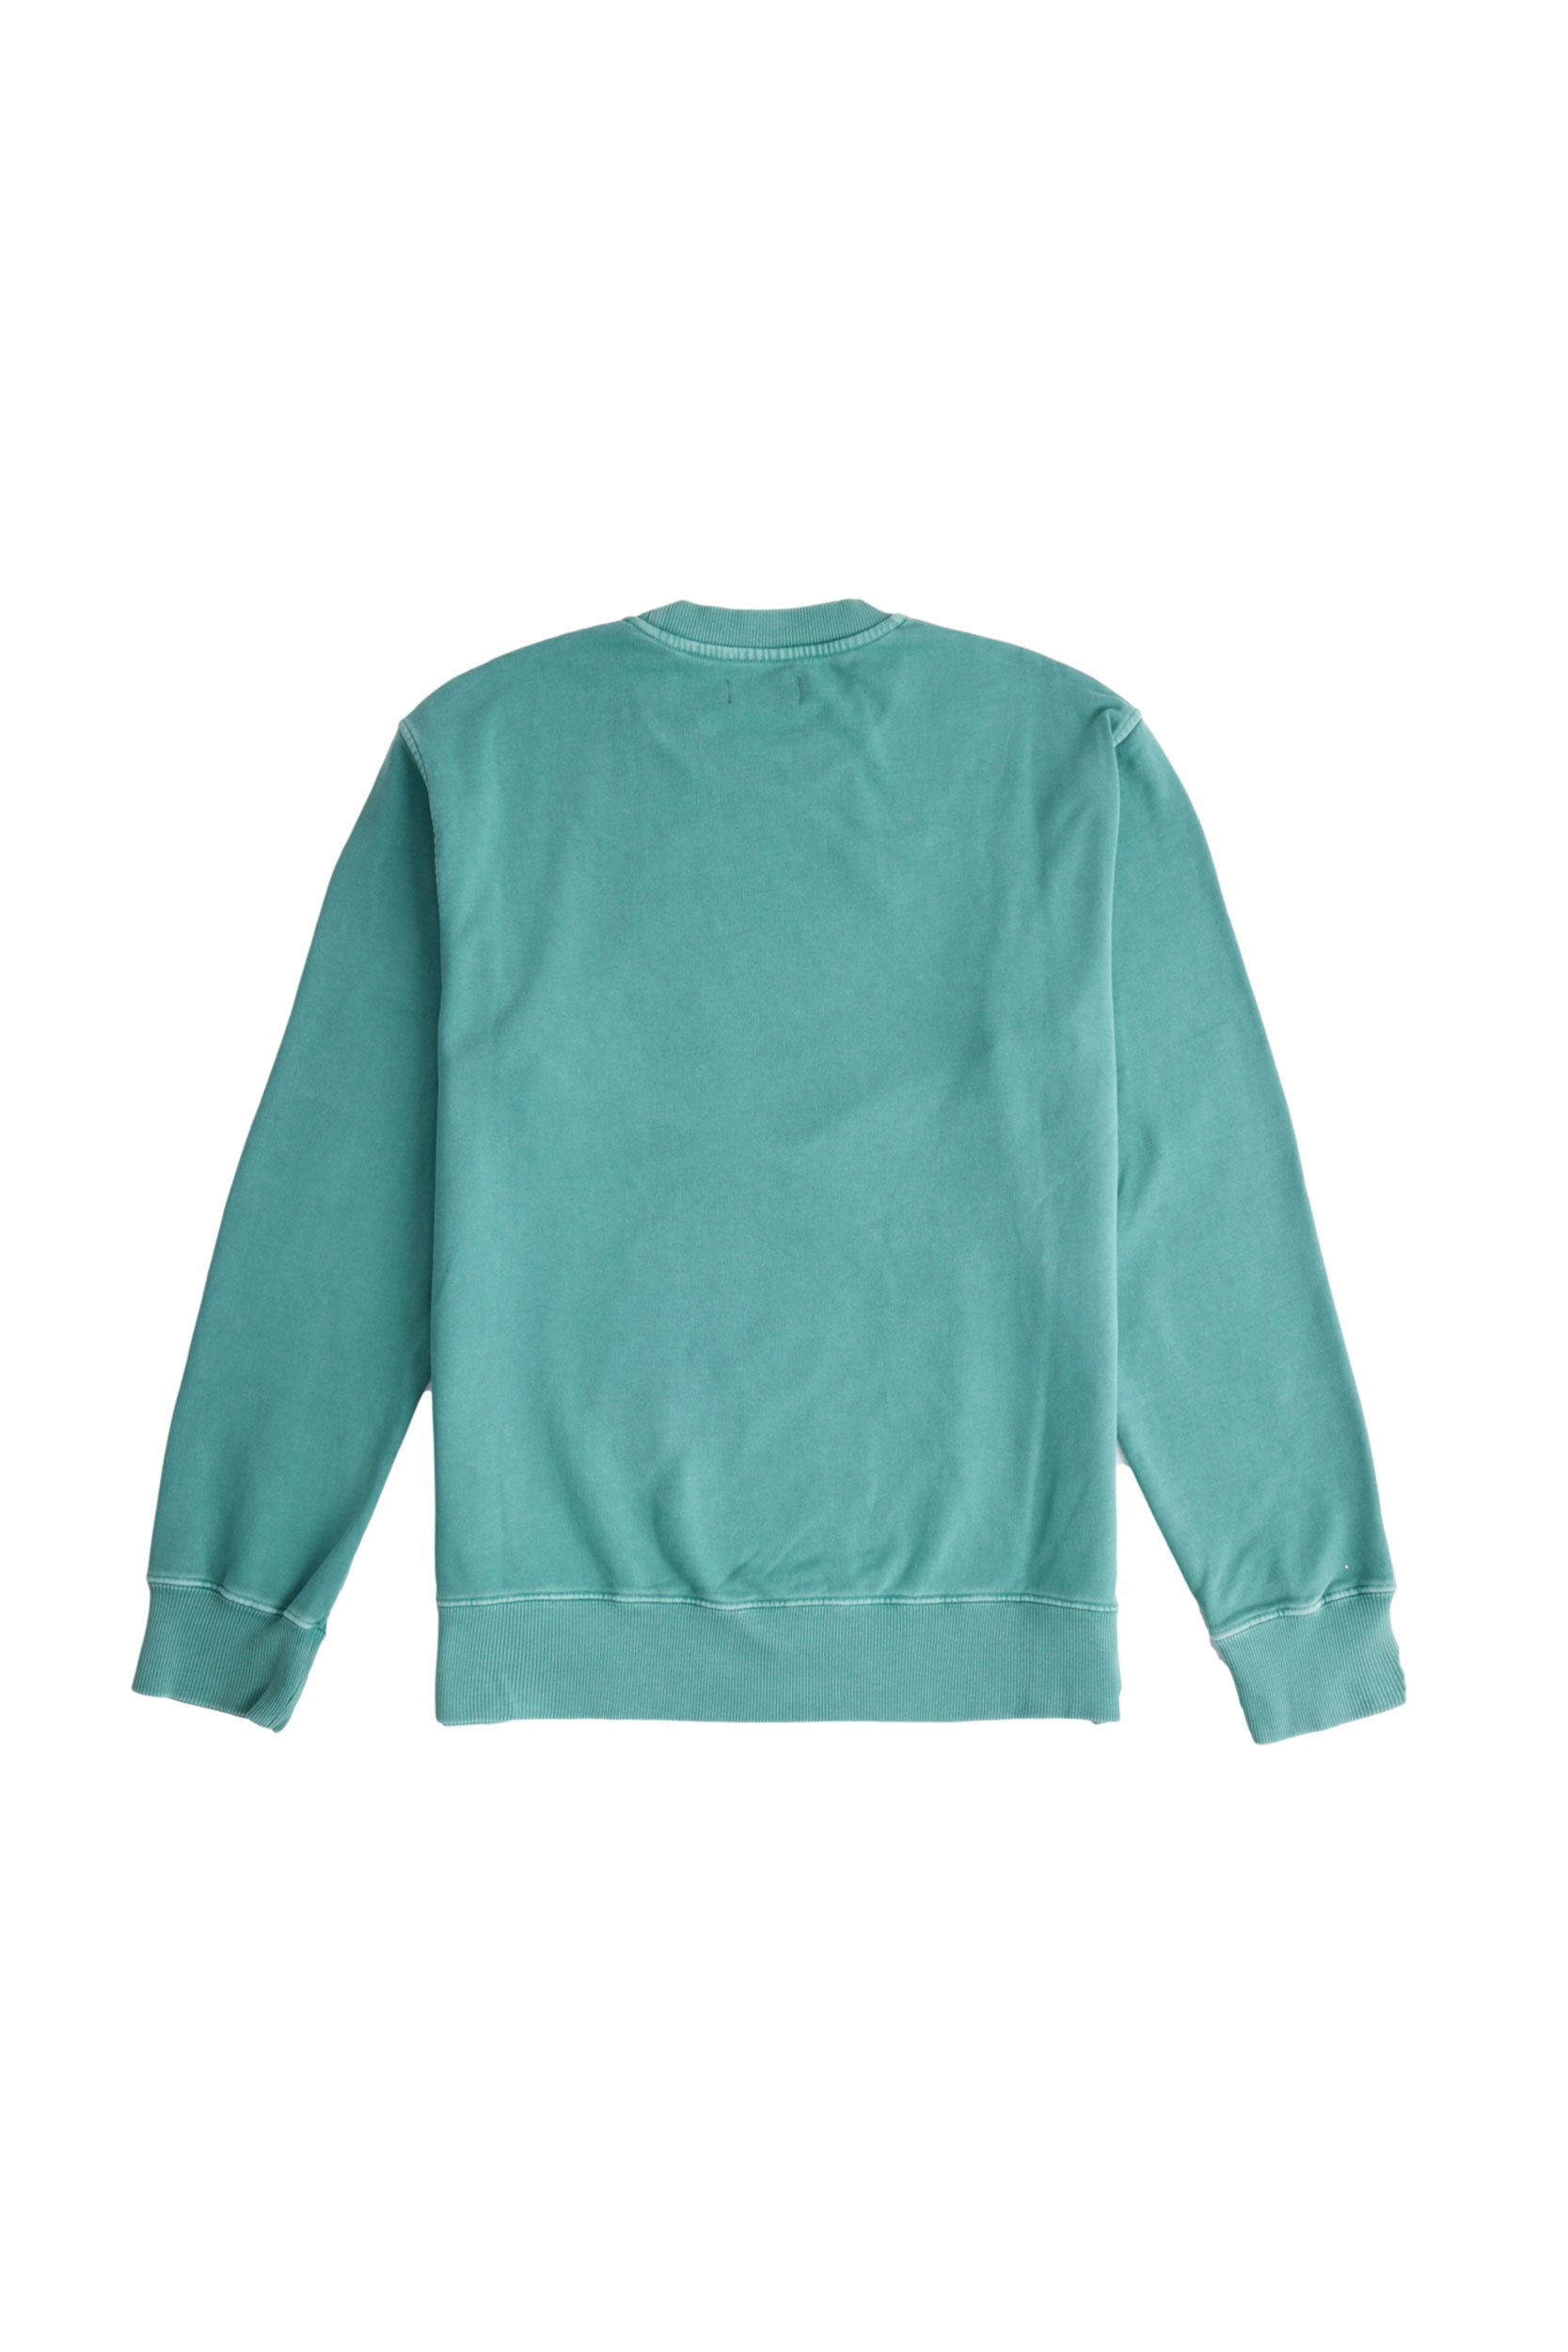 Relaxed Fit Graphic Crewneck Sweatshirt - Green